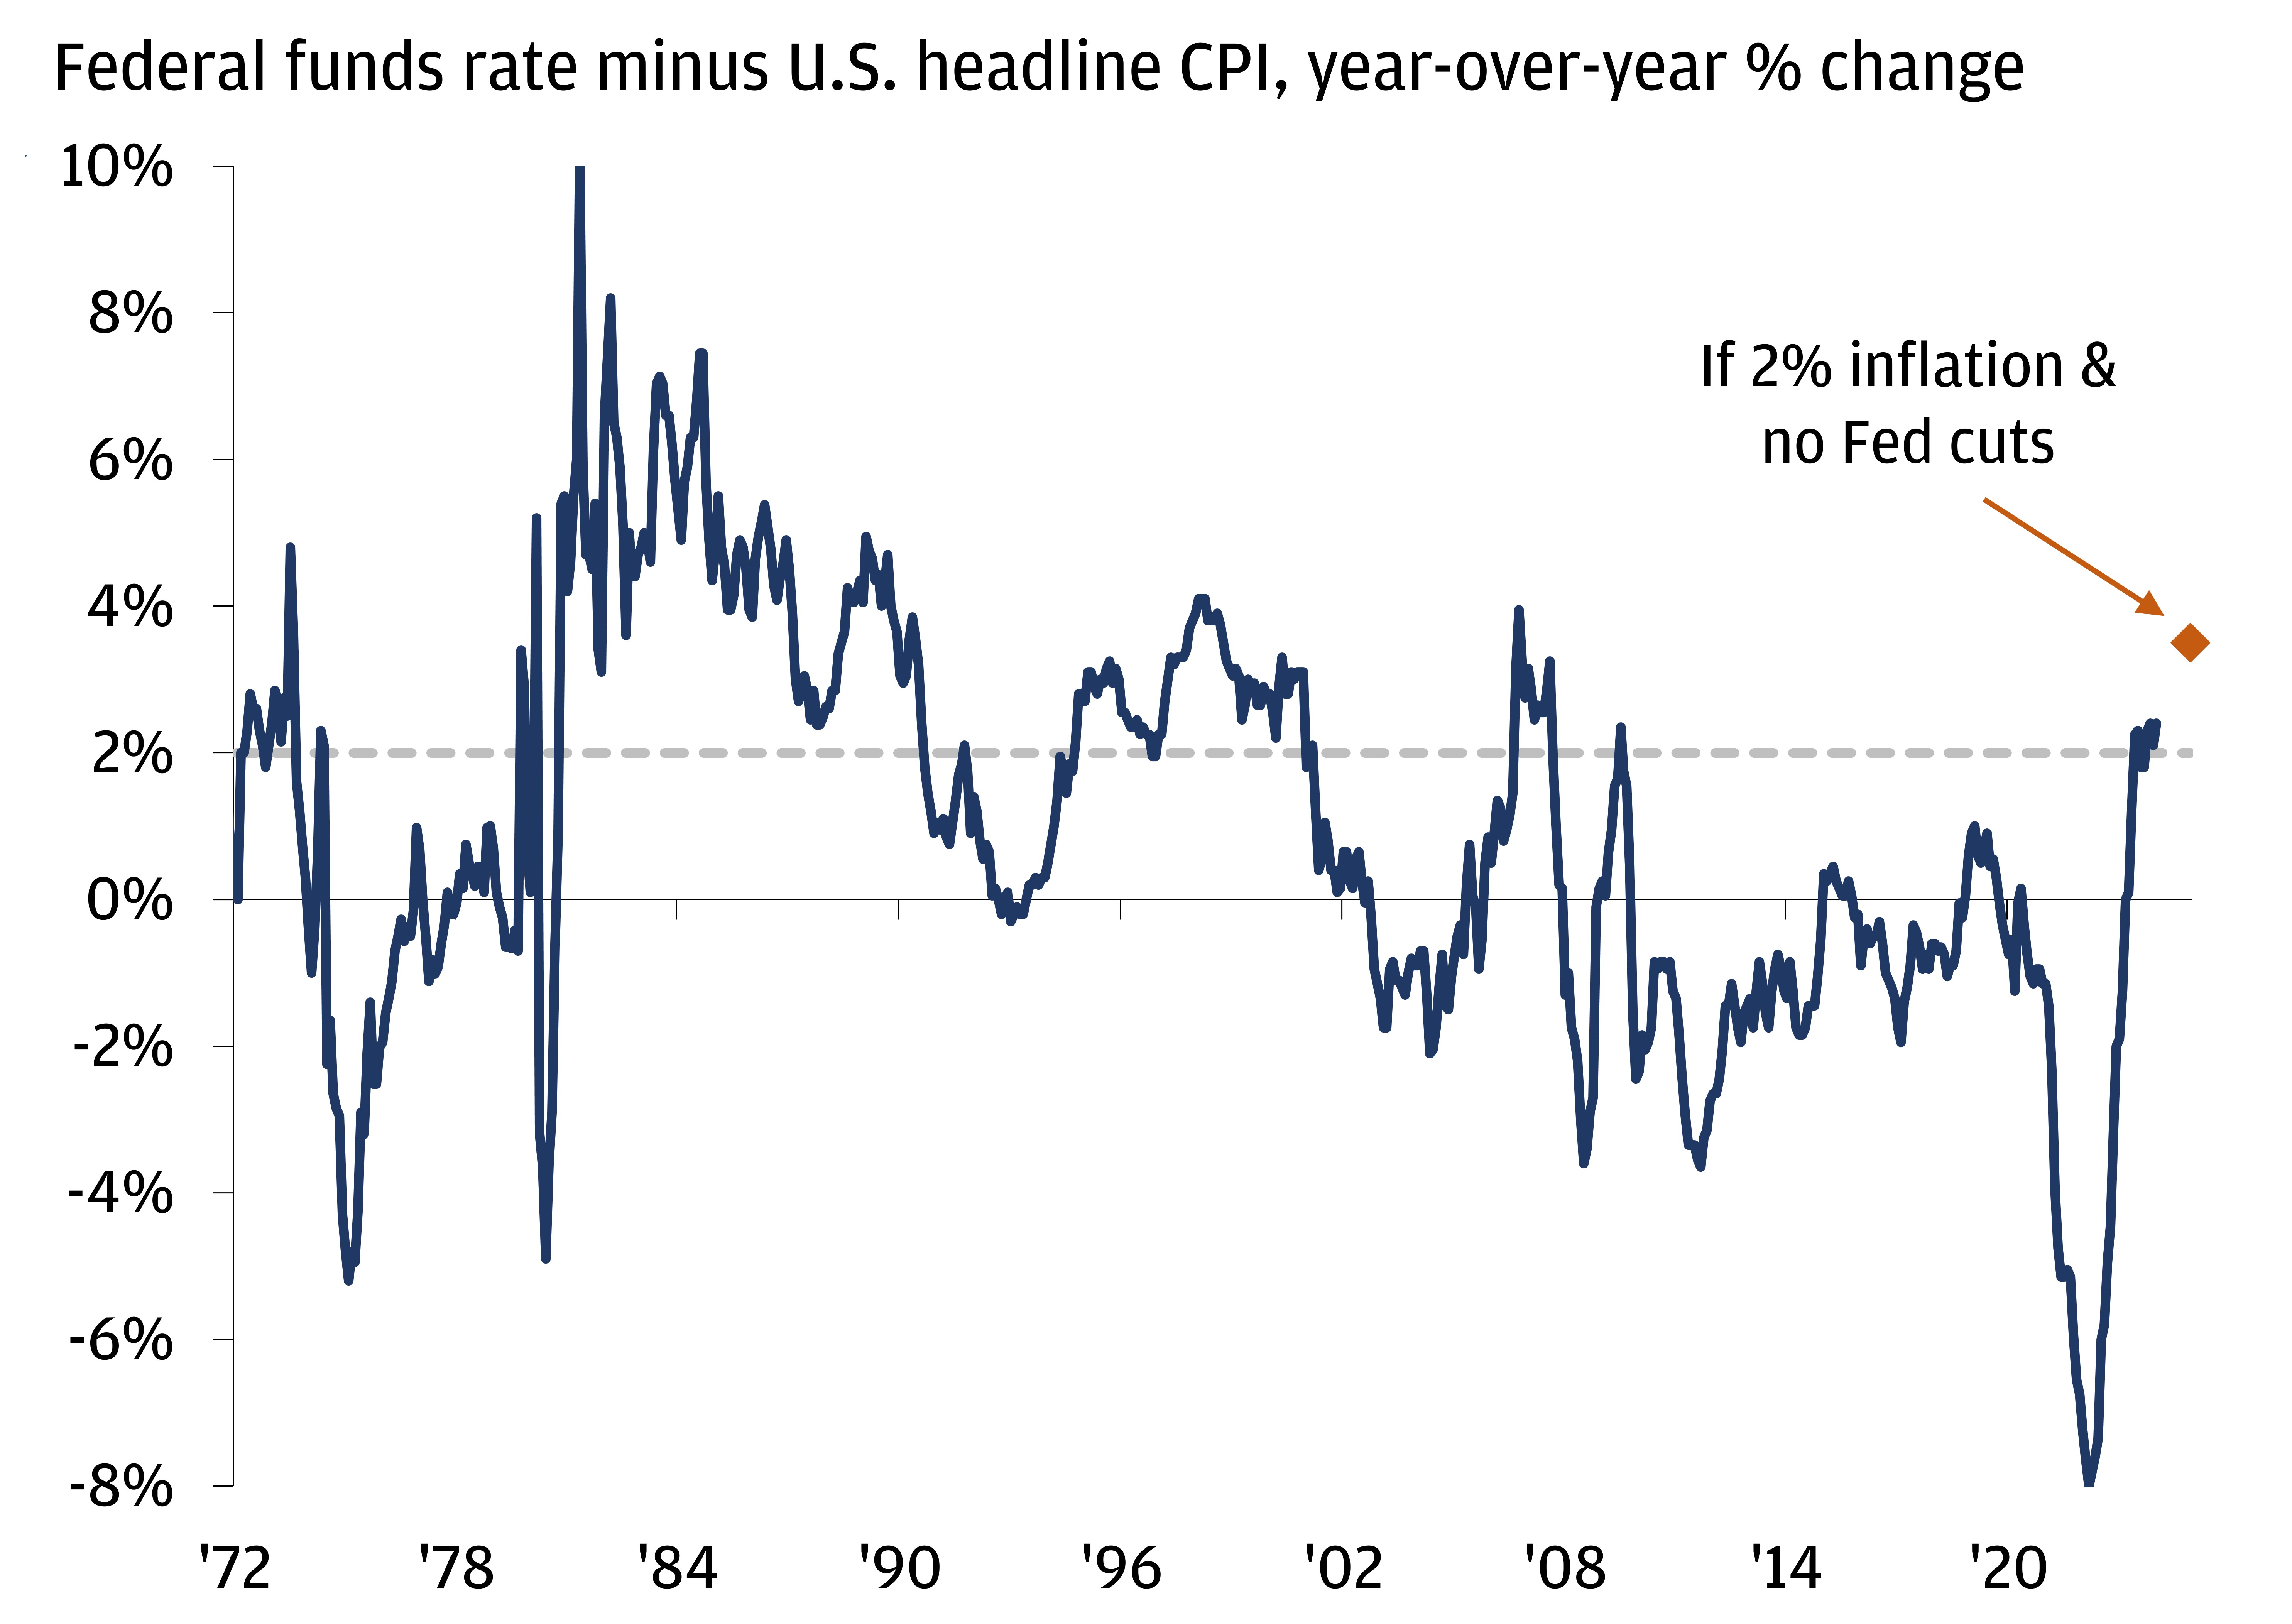 This line chart shows the real federal funds rate, defined as the federal funds rate minus U.S. headline CPI inflation from 1972 to 2024.